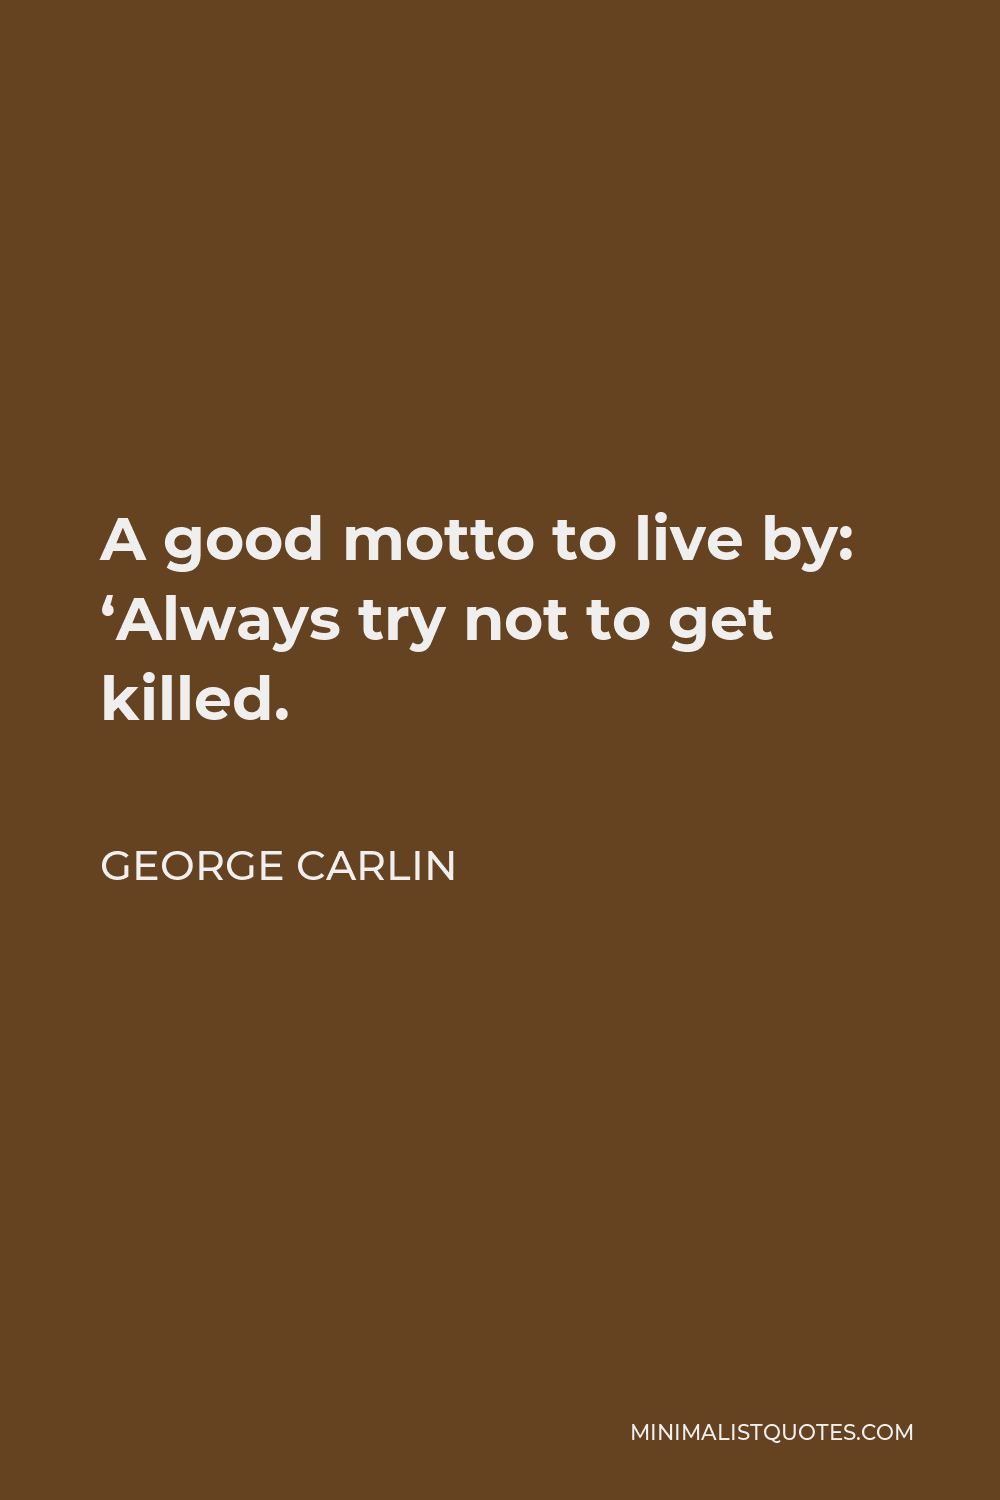 George Carlin Quote - A good motto to live by: ‘Always try not to get killed.